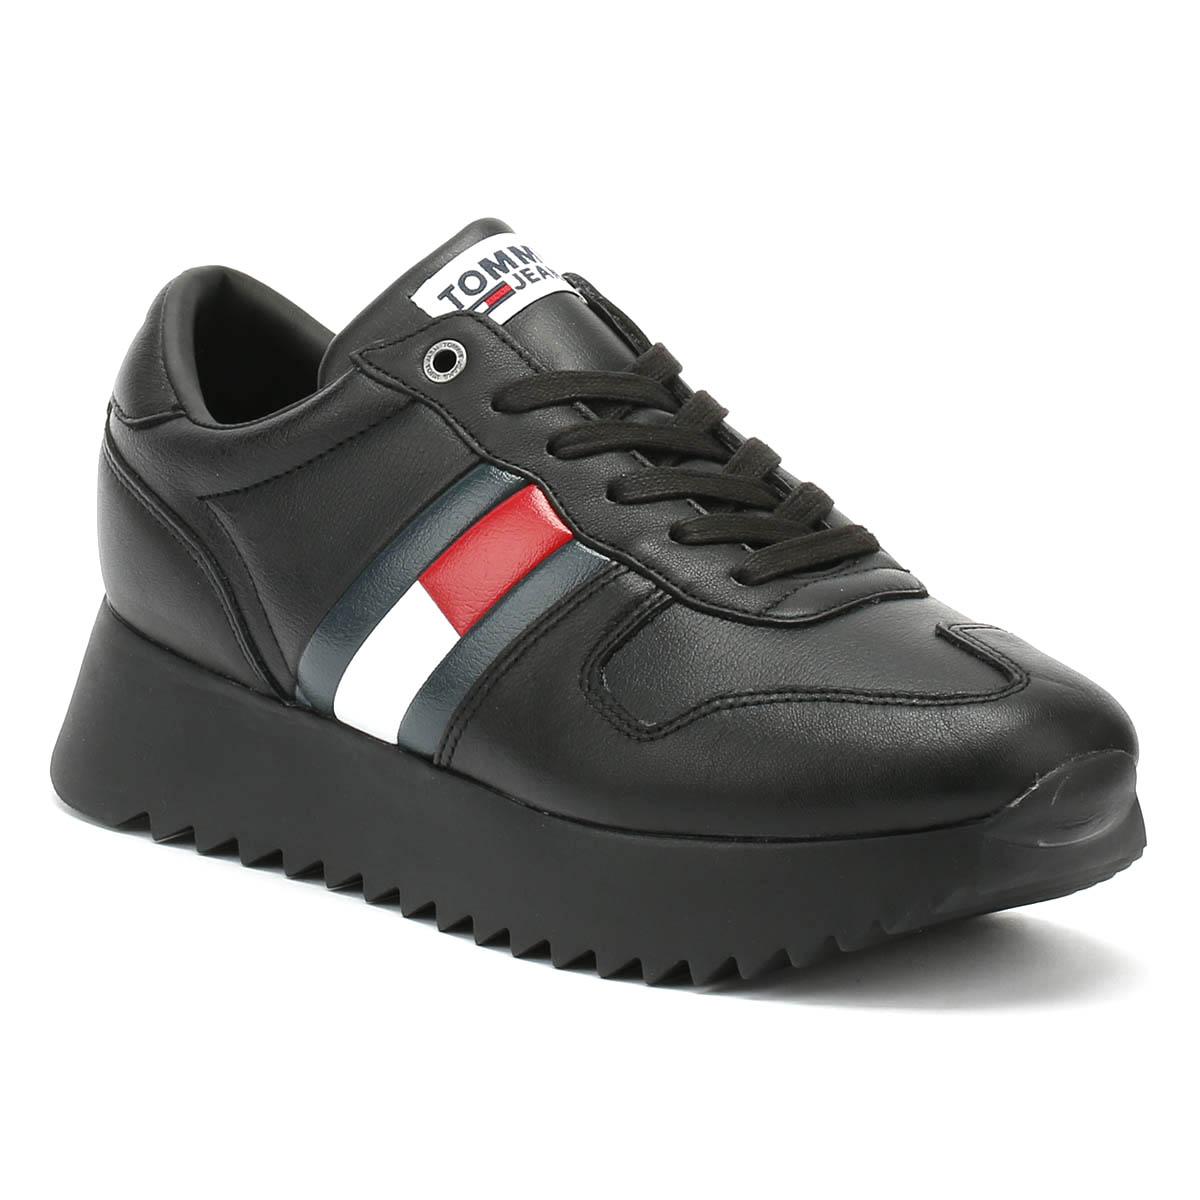 Tommy Hilfiger Leather High Cleated Sneakers in Black Red White (Black) -  Lyst